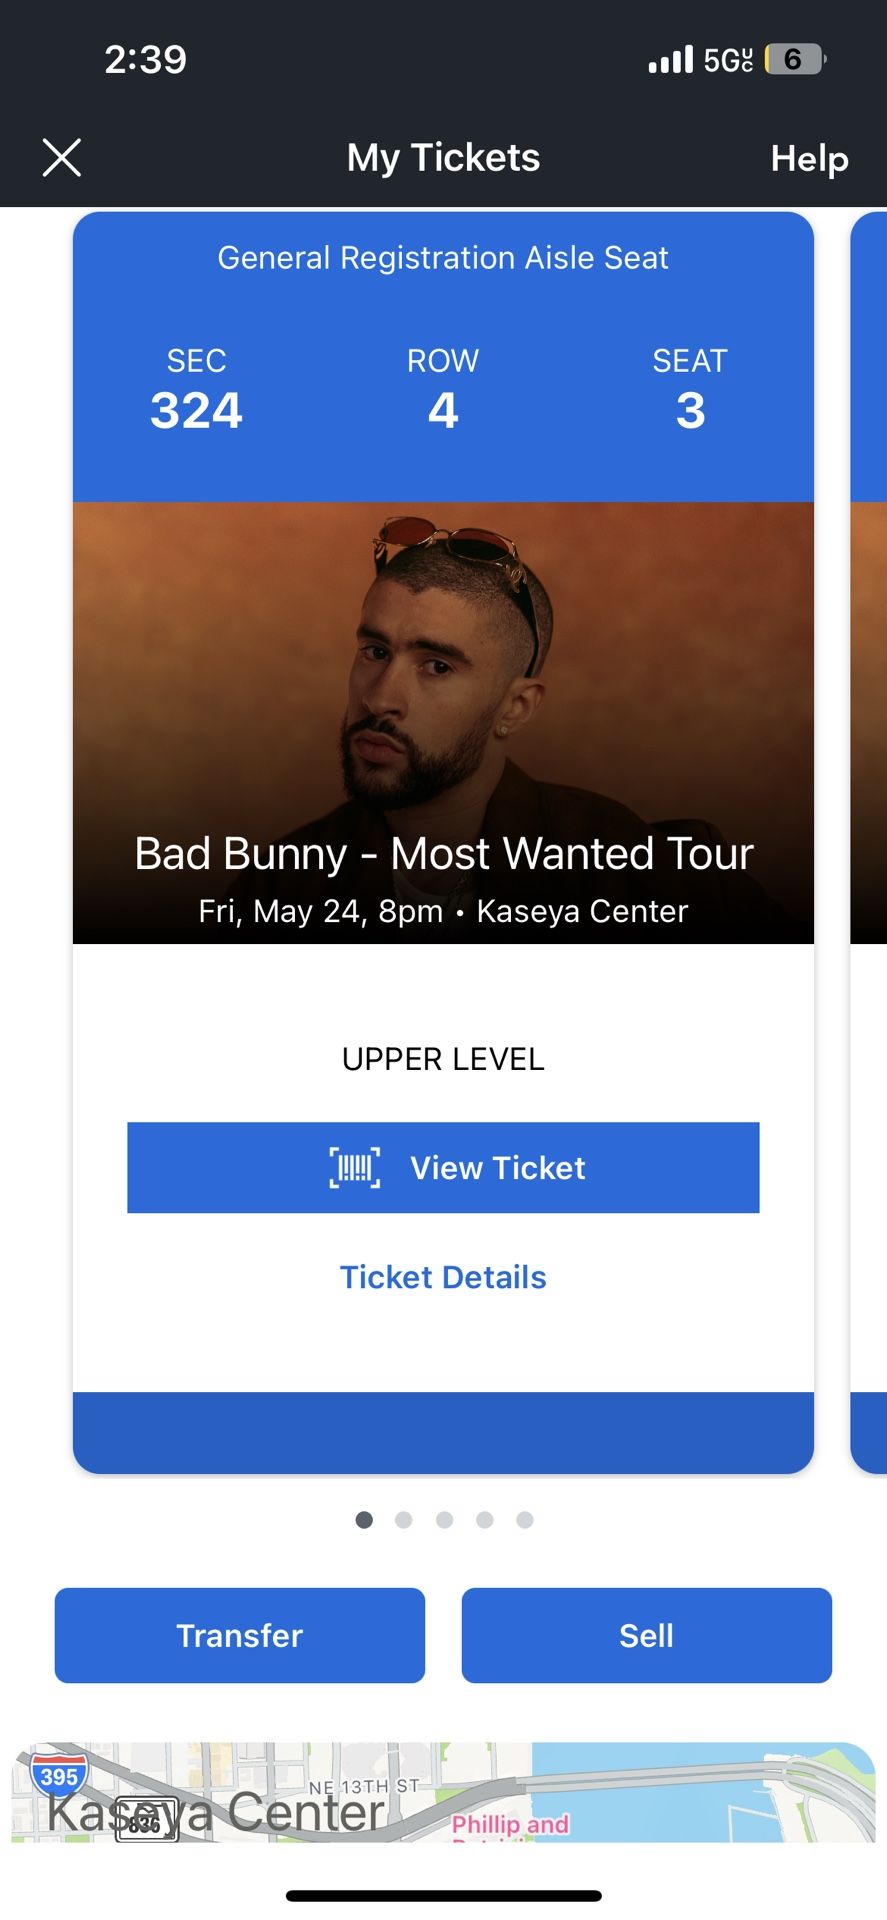 Bad Bunny - Most Wanted Tour - Tickets